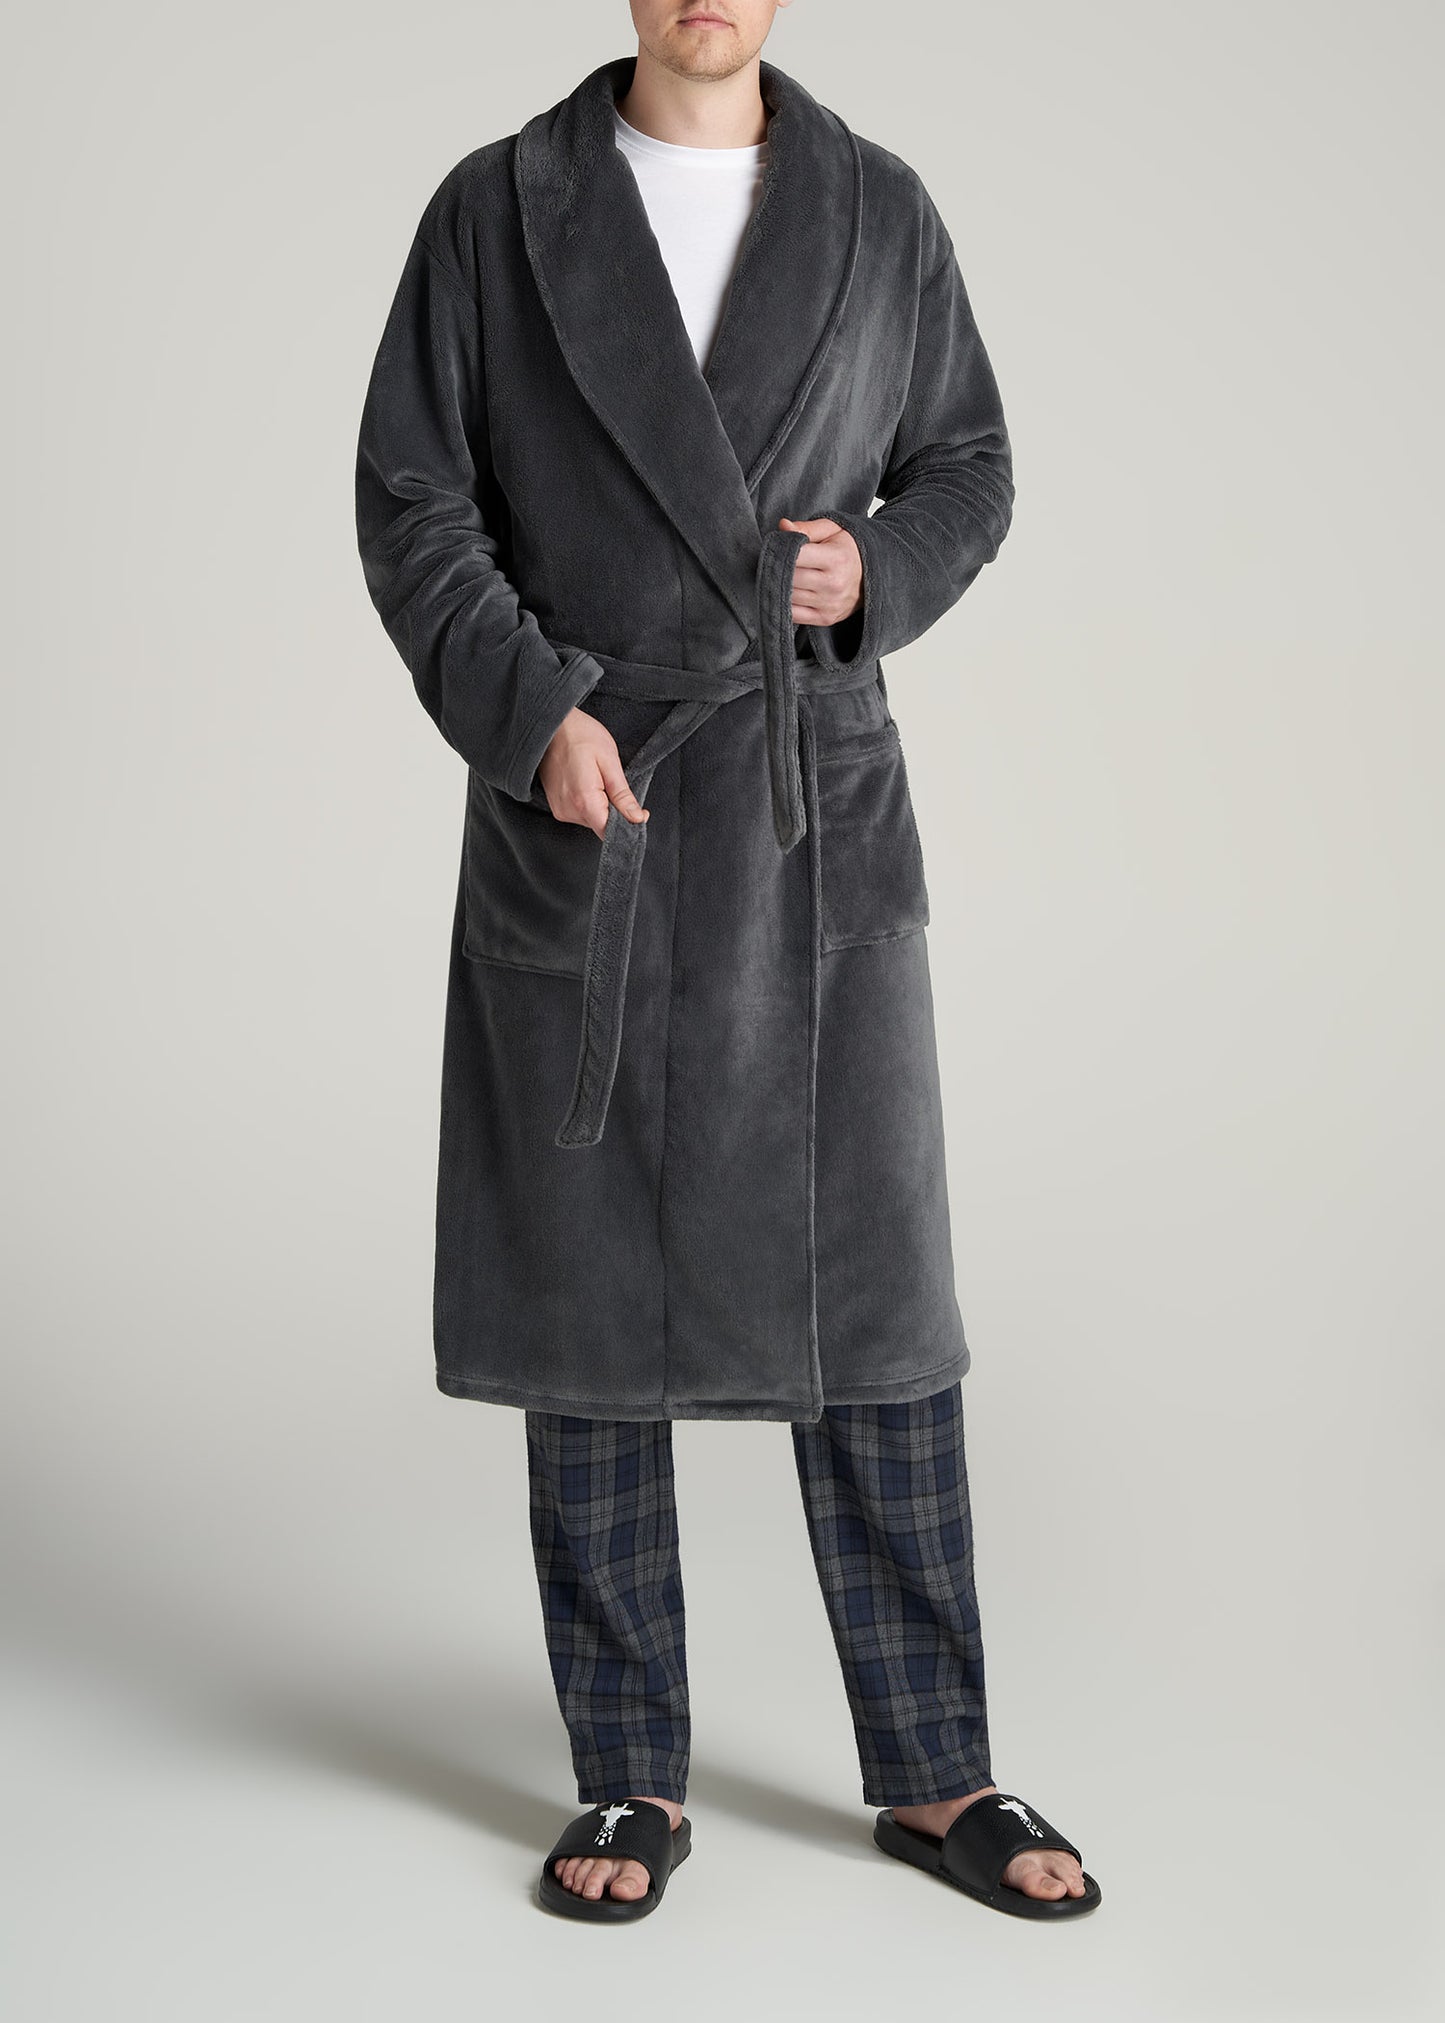 A tall man wearing Tall Men's Robe in Charcoal in Charcoal from American Tall